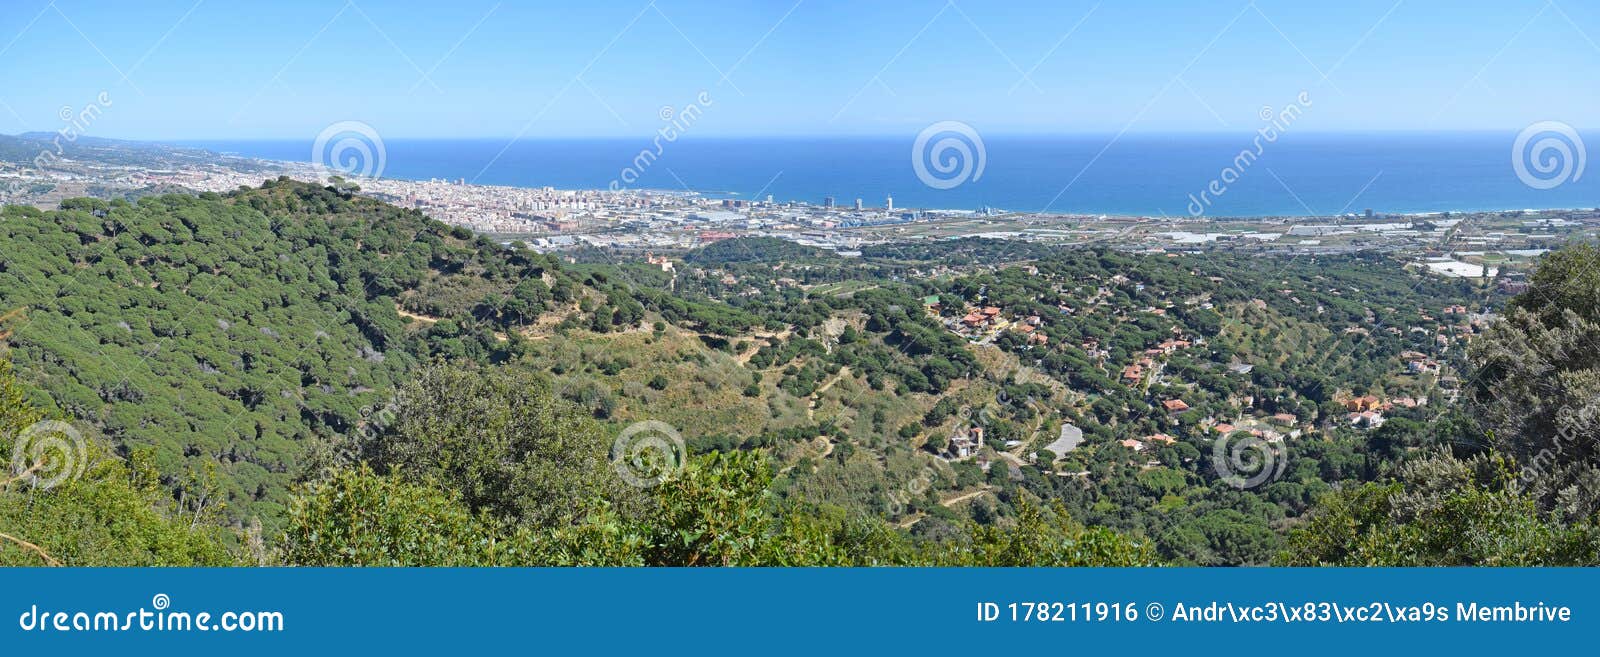 panoramic view of mountains and beaches of maresme